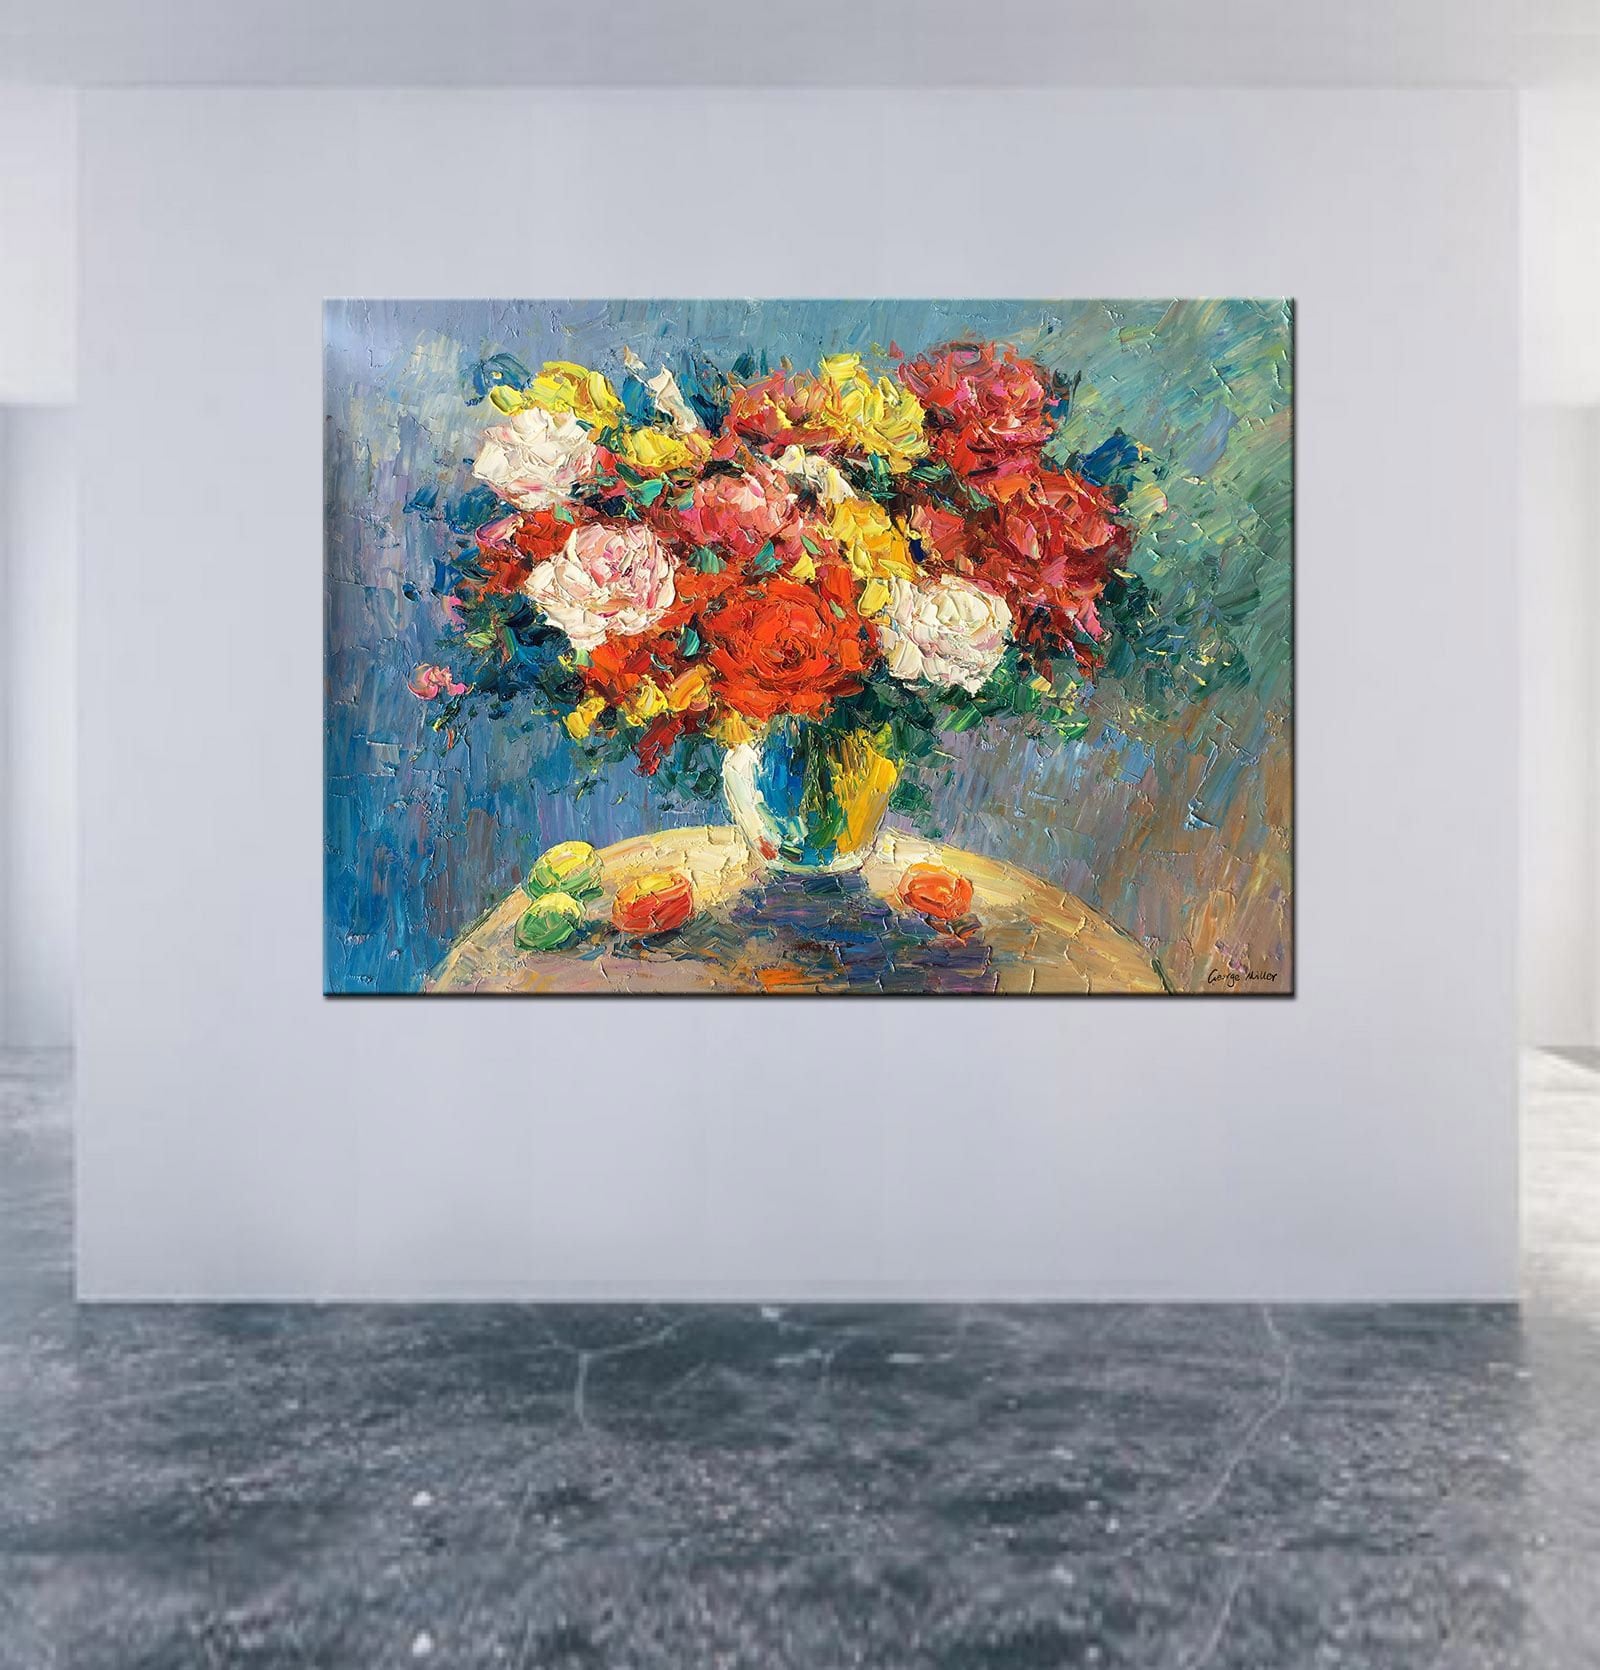 Abstract Spring Flowers - Large Canvas Art - Contemporary Wall Decor - Textured - Ready to Hang